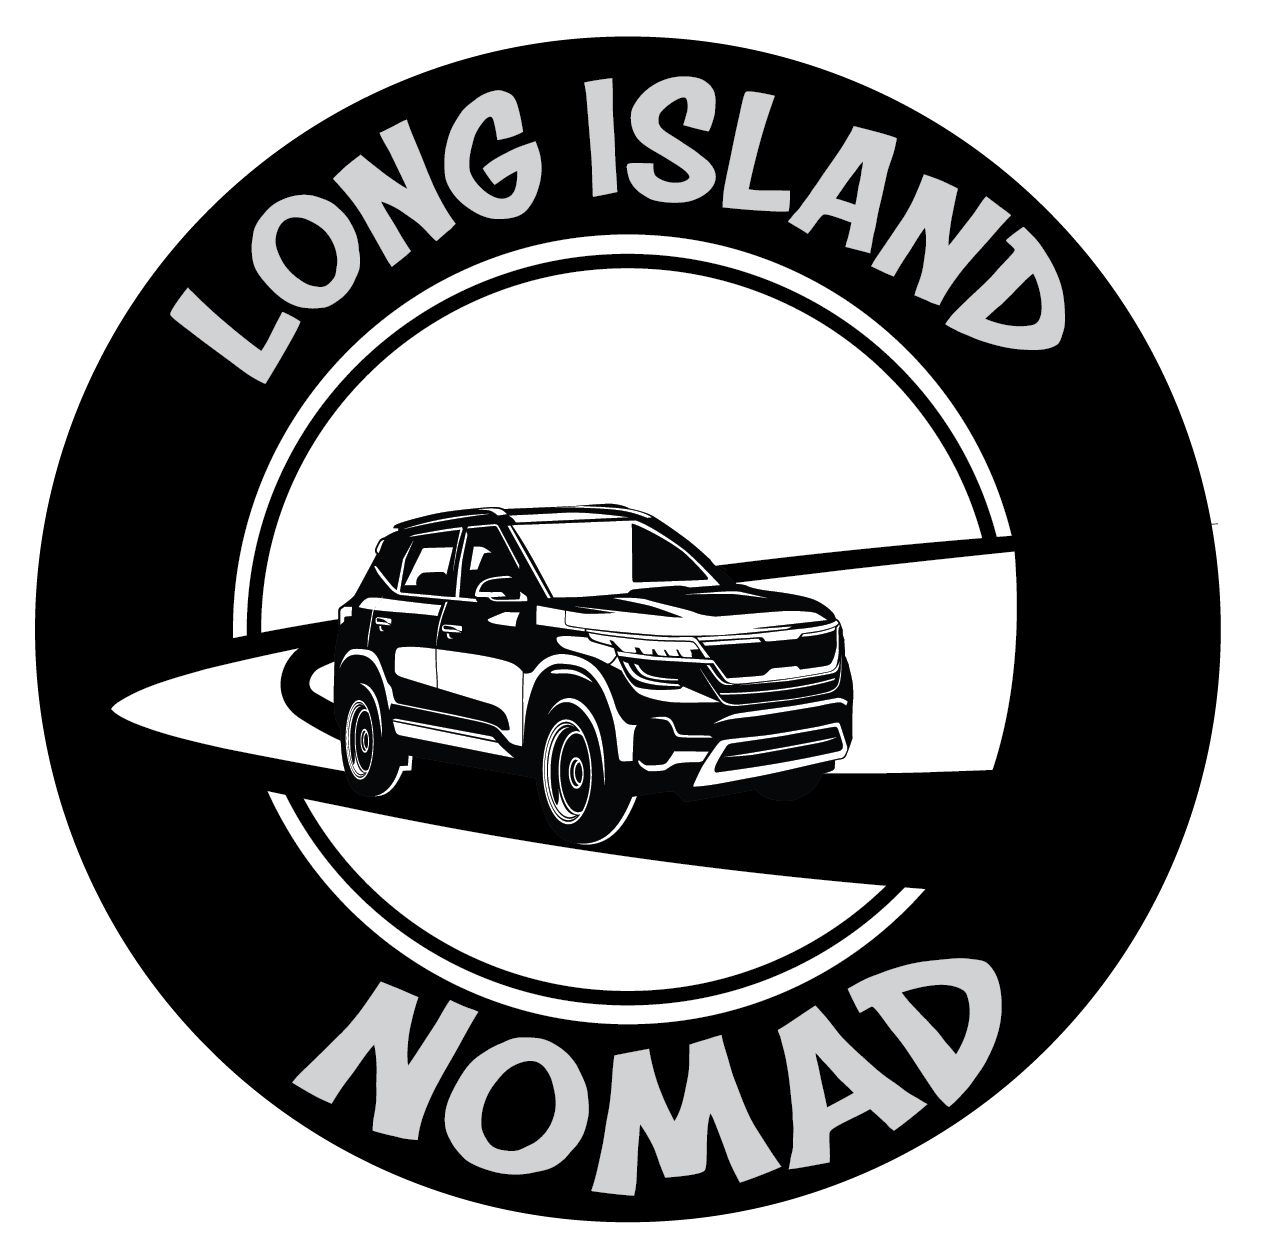 Long Island Nomad- Driver for Hire Serving All of Long Island!